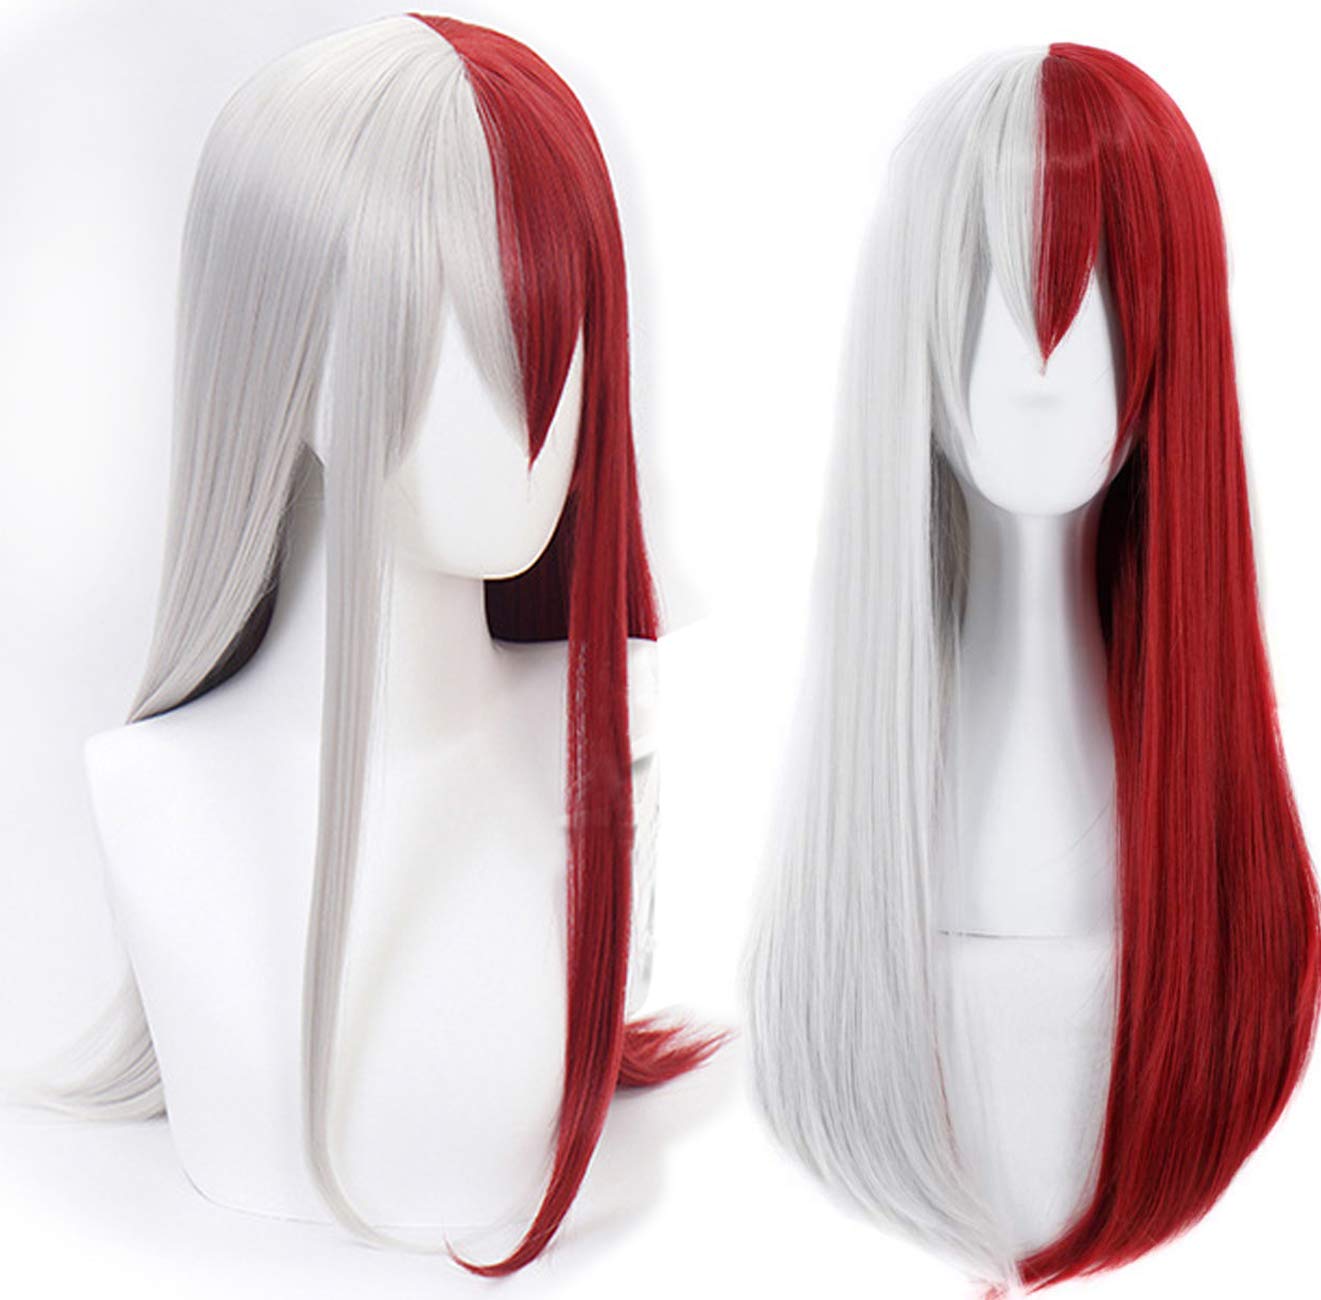 Cosplay Wigs Red and Black for Women Long Curly Hair Wigs Lolita Style Wigs  - China Hair Wigs and Cosplay Wig price | Made-in-China.com